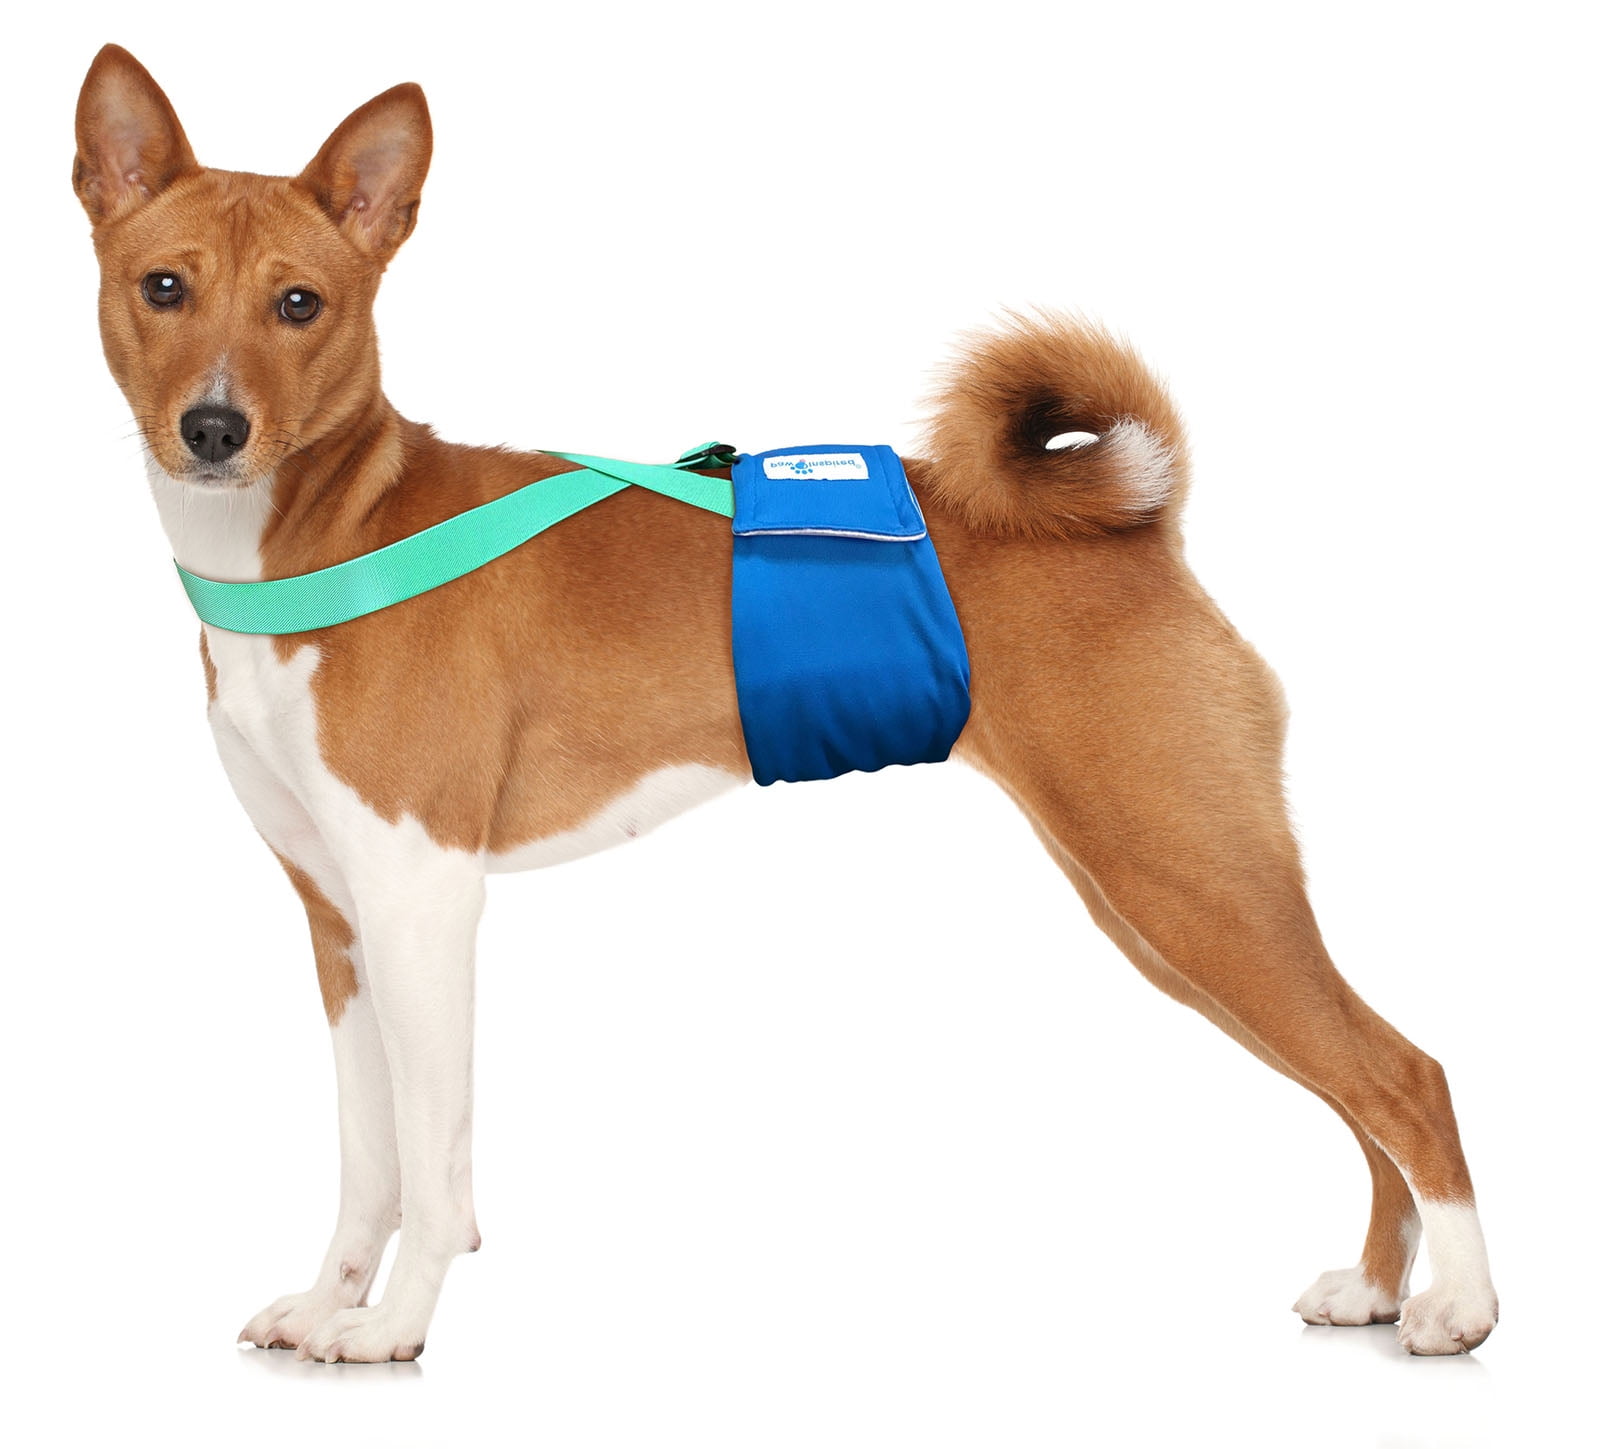 belly wrap band diaper for male dog – Animalerie en ligne Animauxenligne.com